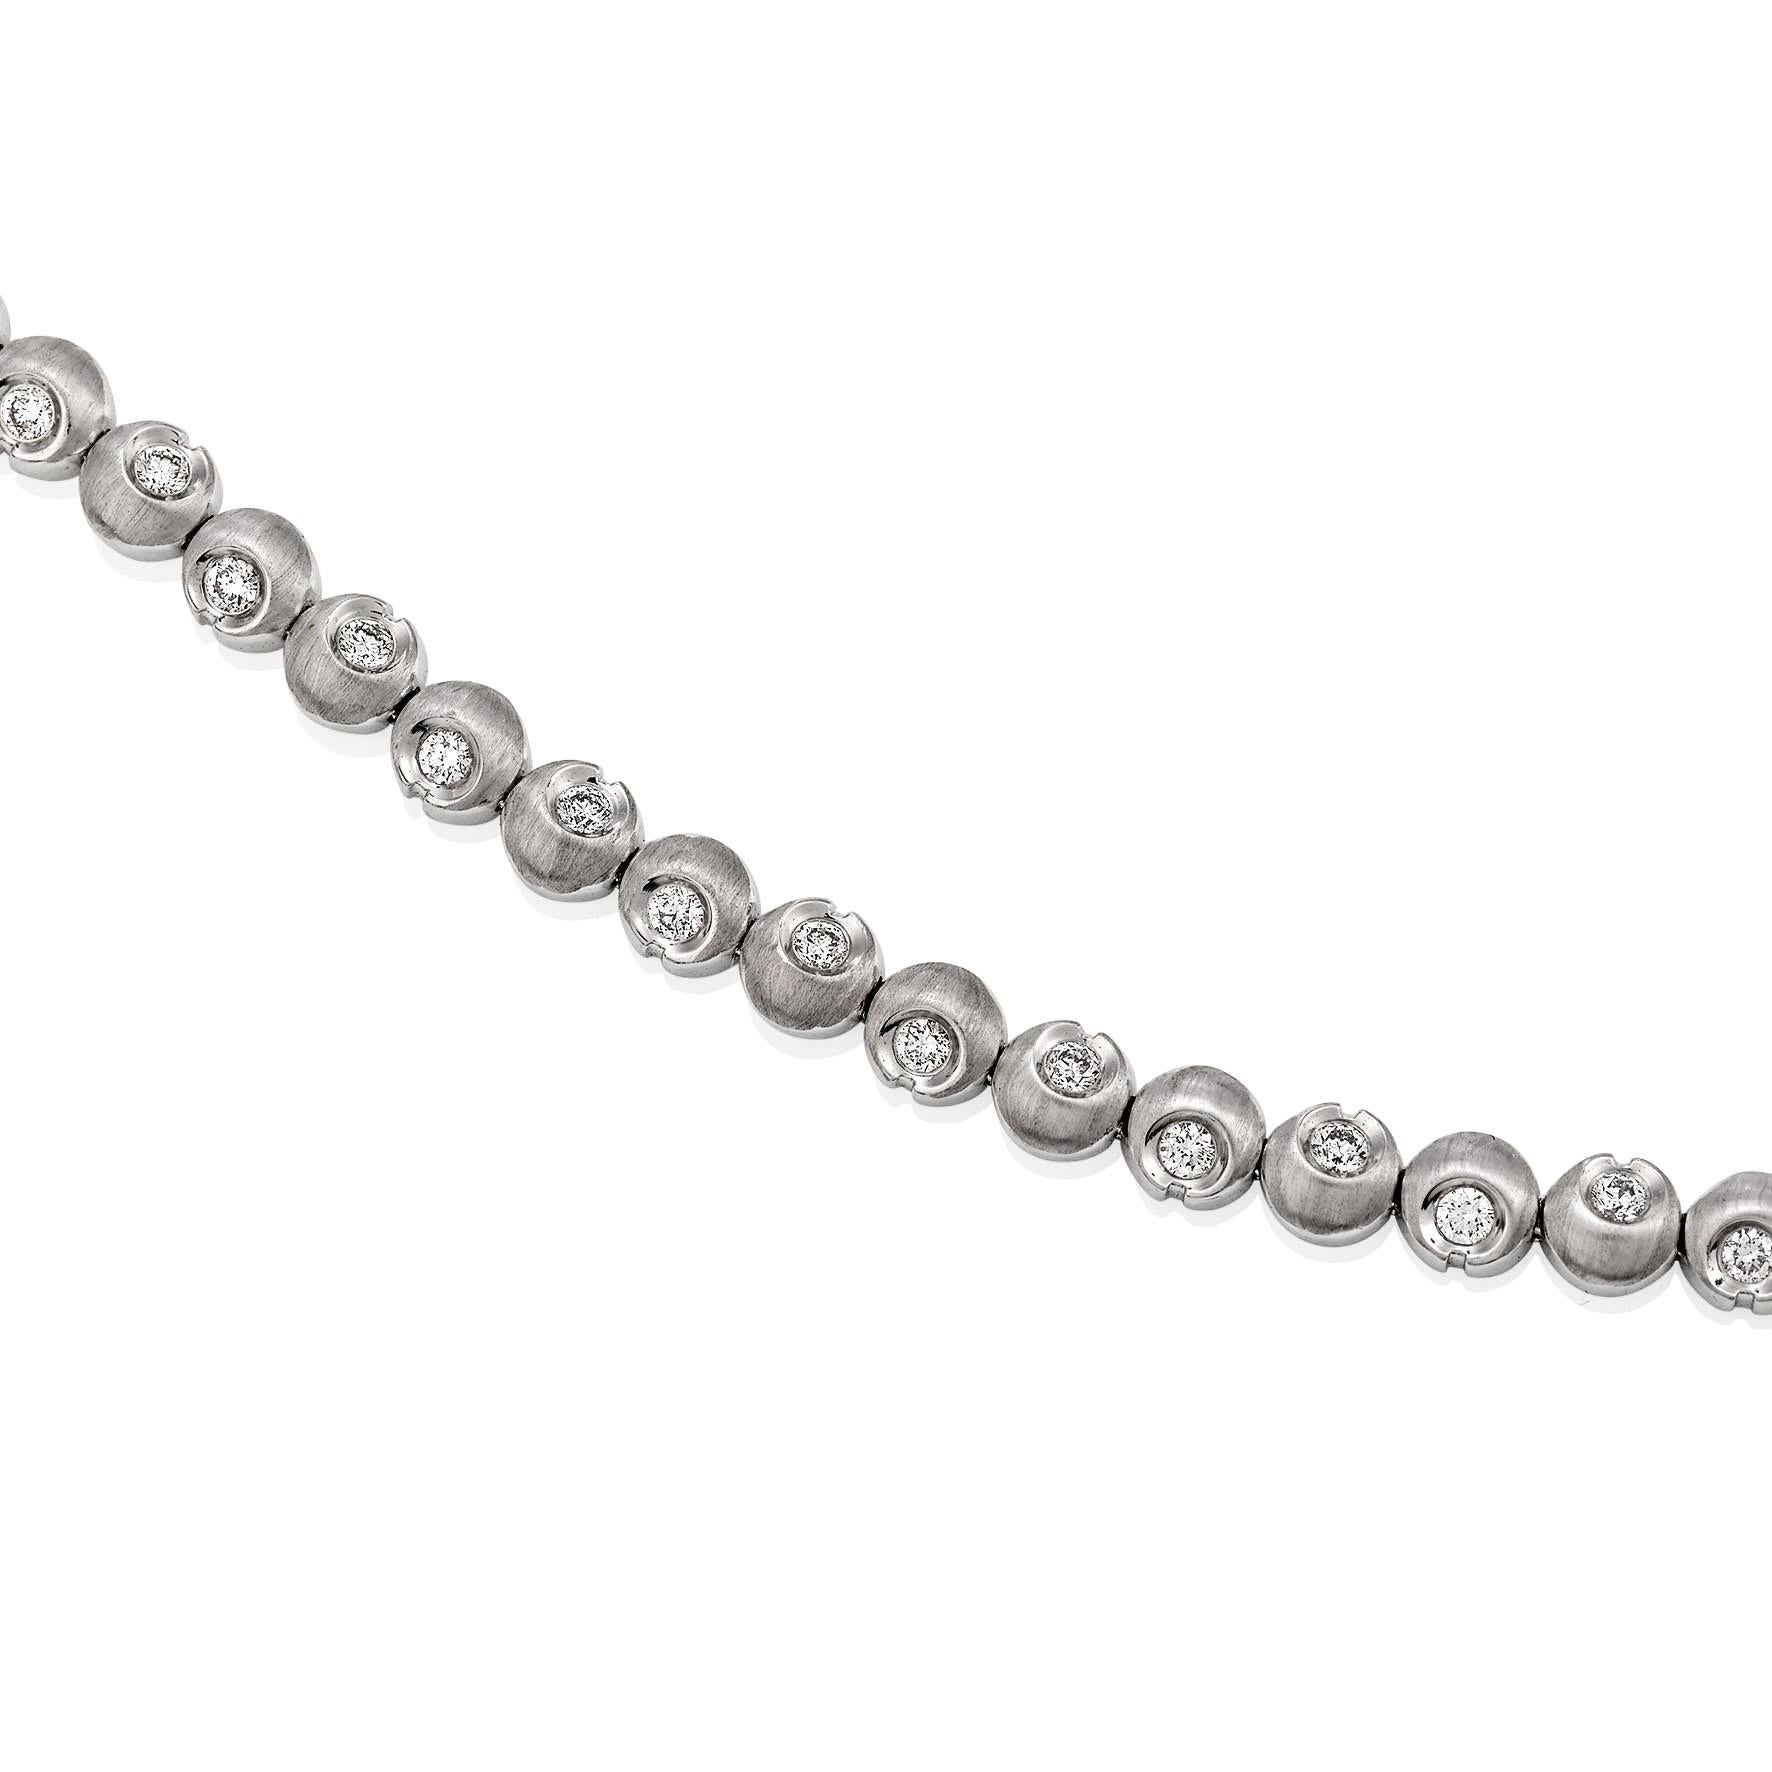 Giulians contemporary 18 karat white gold diamond bracelet.  This bracelet features 36 round brilliant cut diamonds (36=1.10ct G VS), each semi-bezel set within a half moon shaped link.  The top of the bracelet has a brush textured finish and